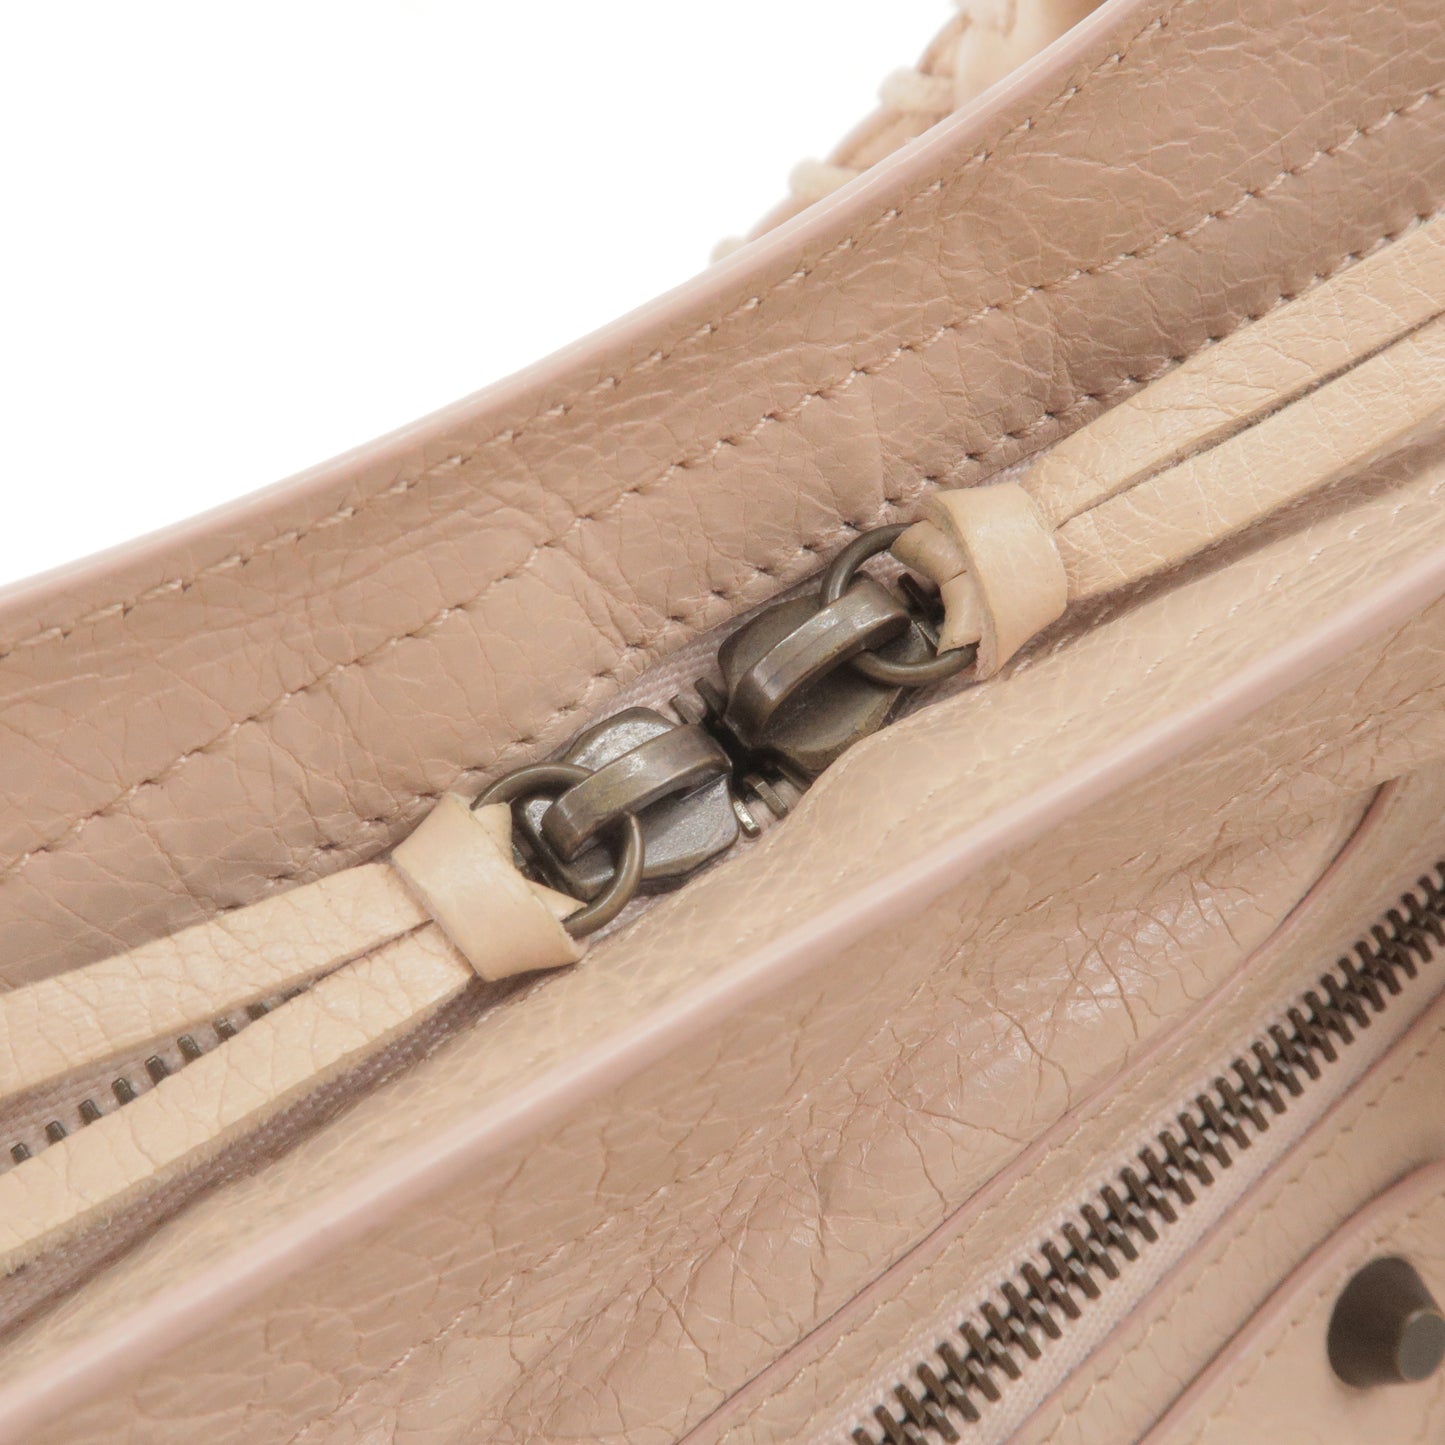 BALENCIAGA The Town Leather 2Way Hand Bag Pink Beige 240579